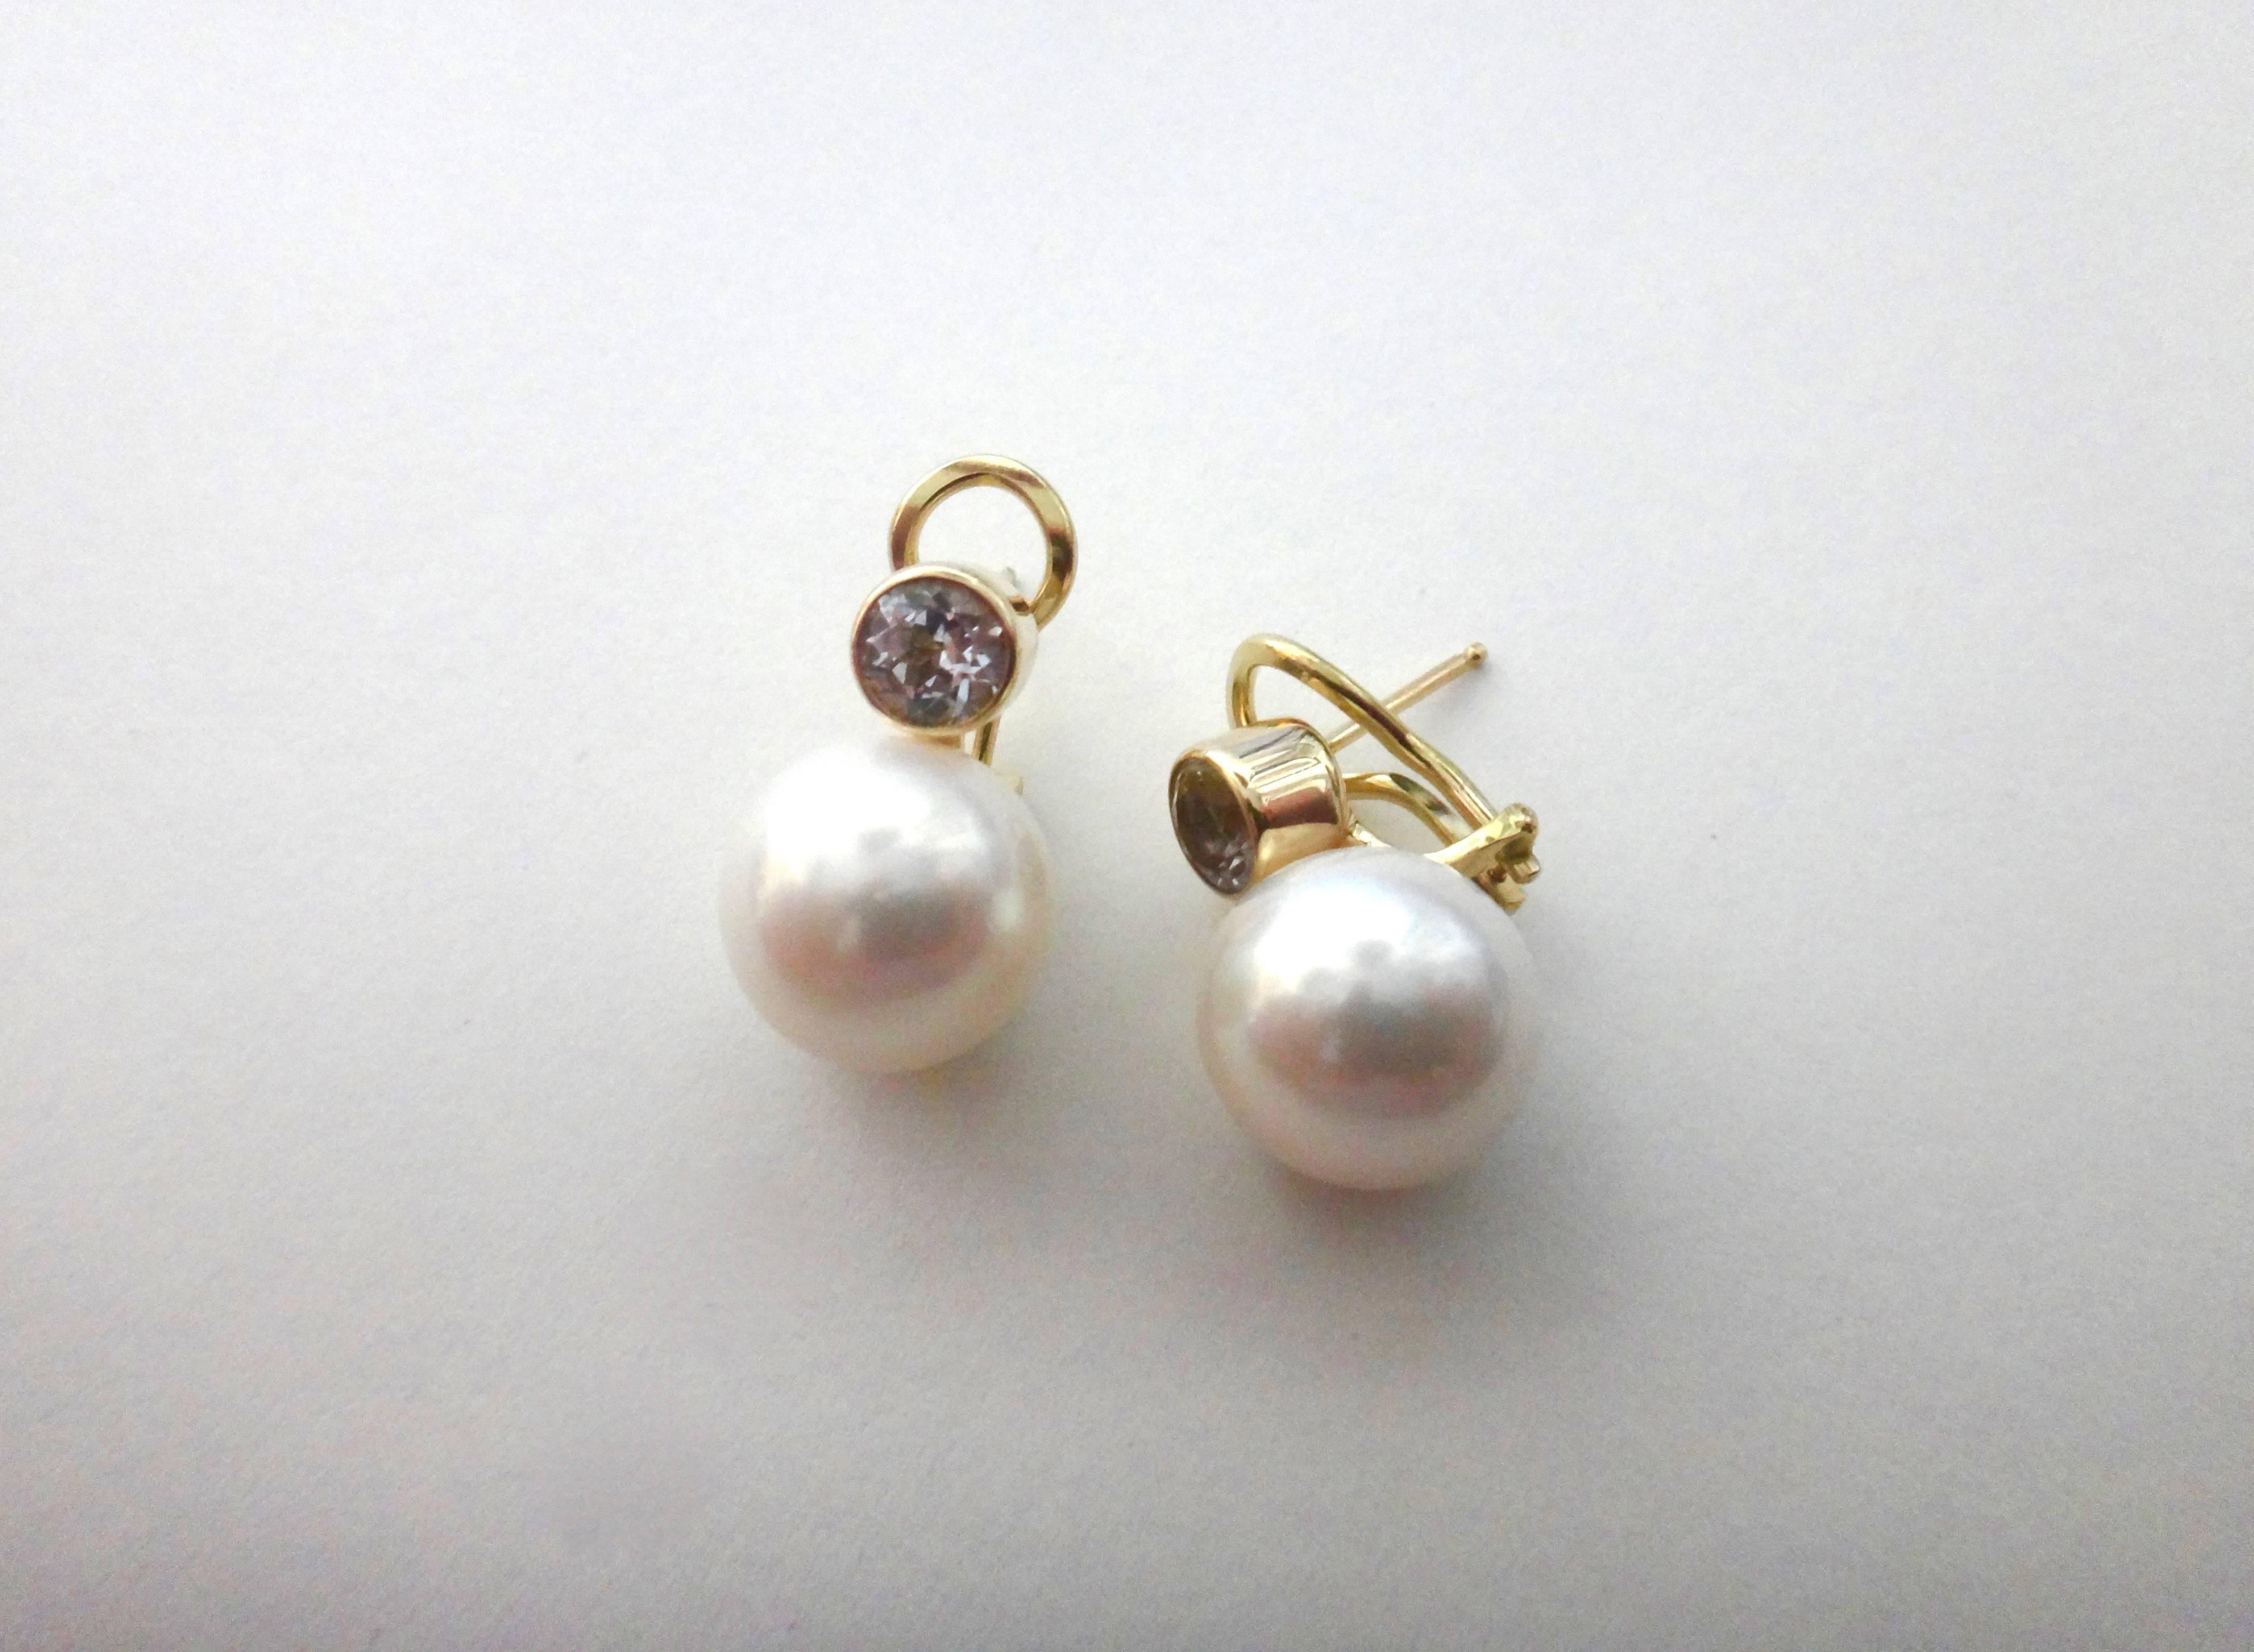 Silver sapphires in a brilliant cut are bezel set and sit atop a pair of fashion quality 12.5mm white South Seas pearls in these classic stud earrings.  Set in 18k yellow gold, the earrings have posts with omega clip backs for comfort and safety. 